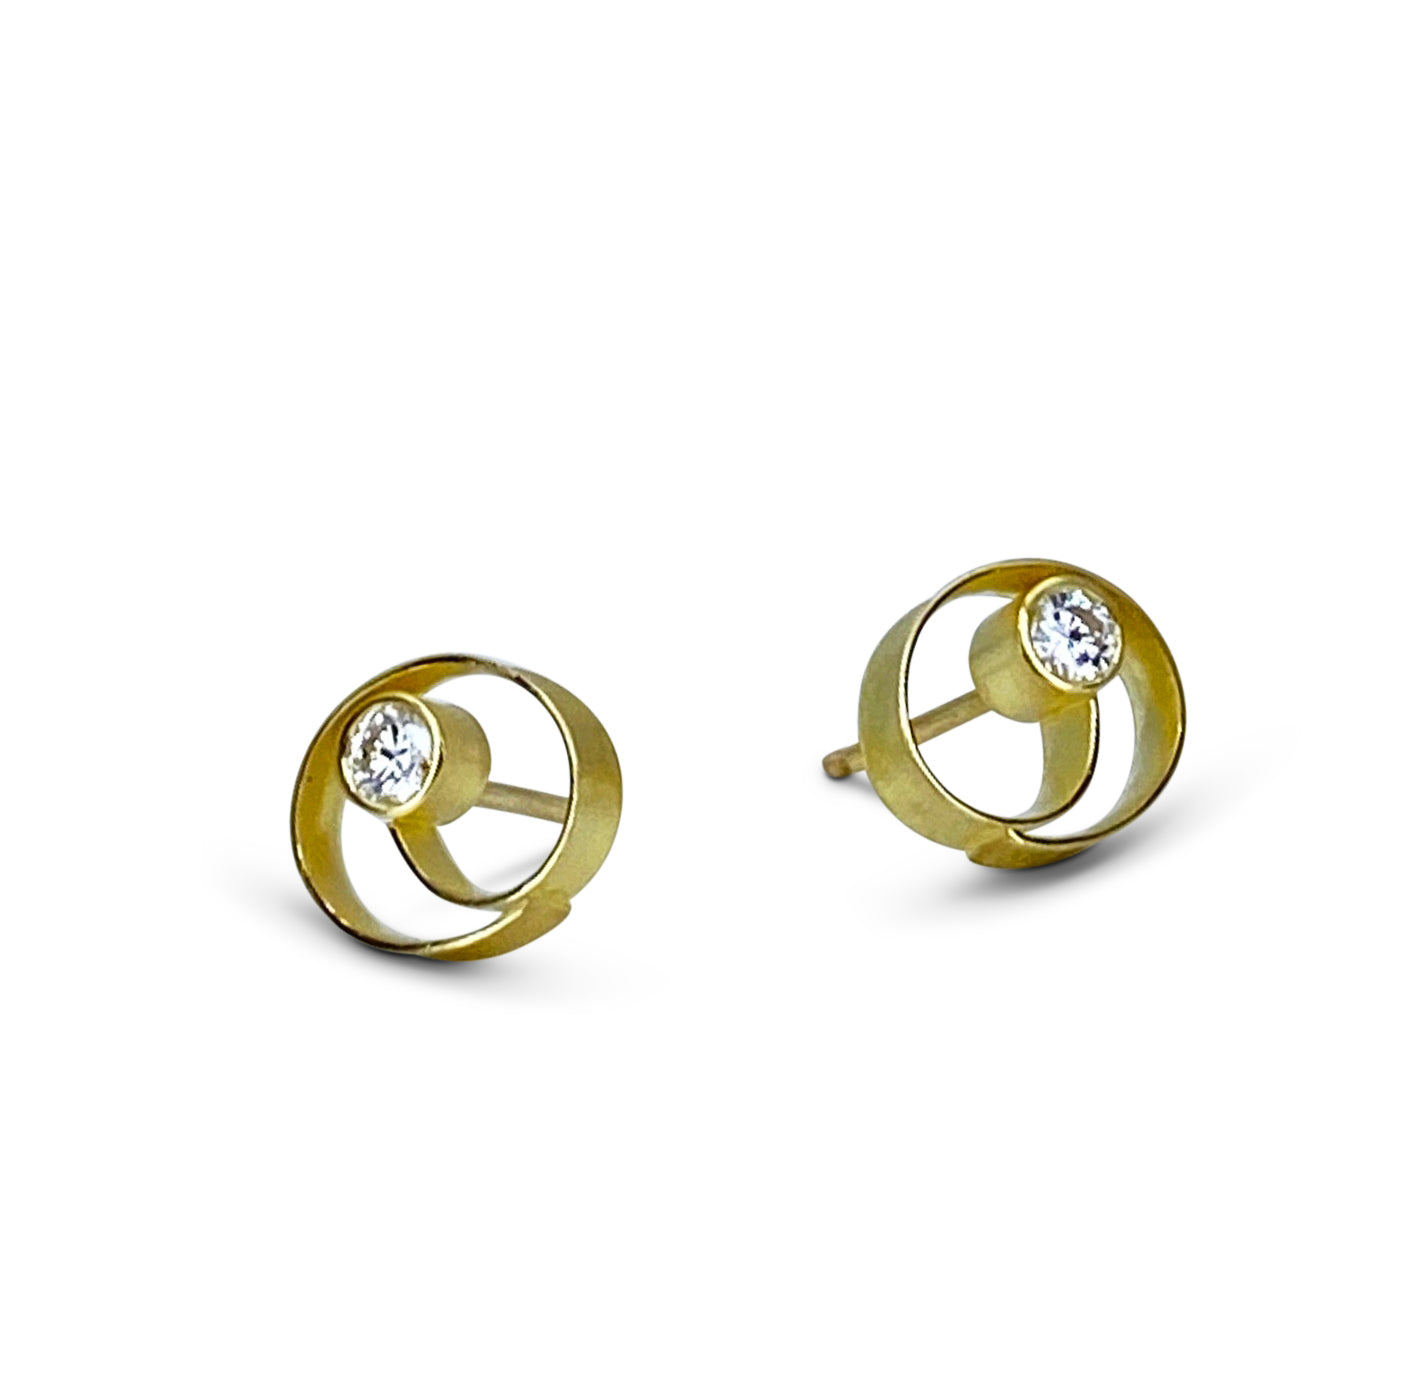 Spiral Earring Studs in 18K yellow gold